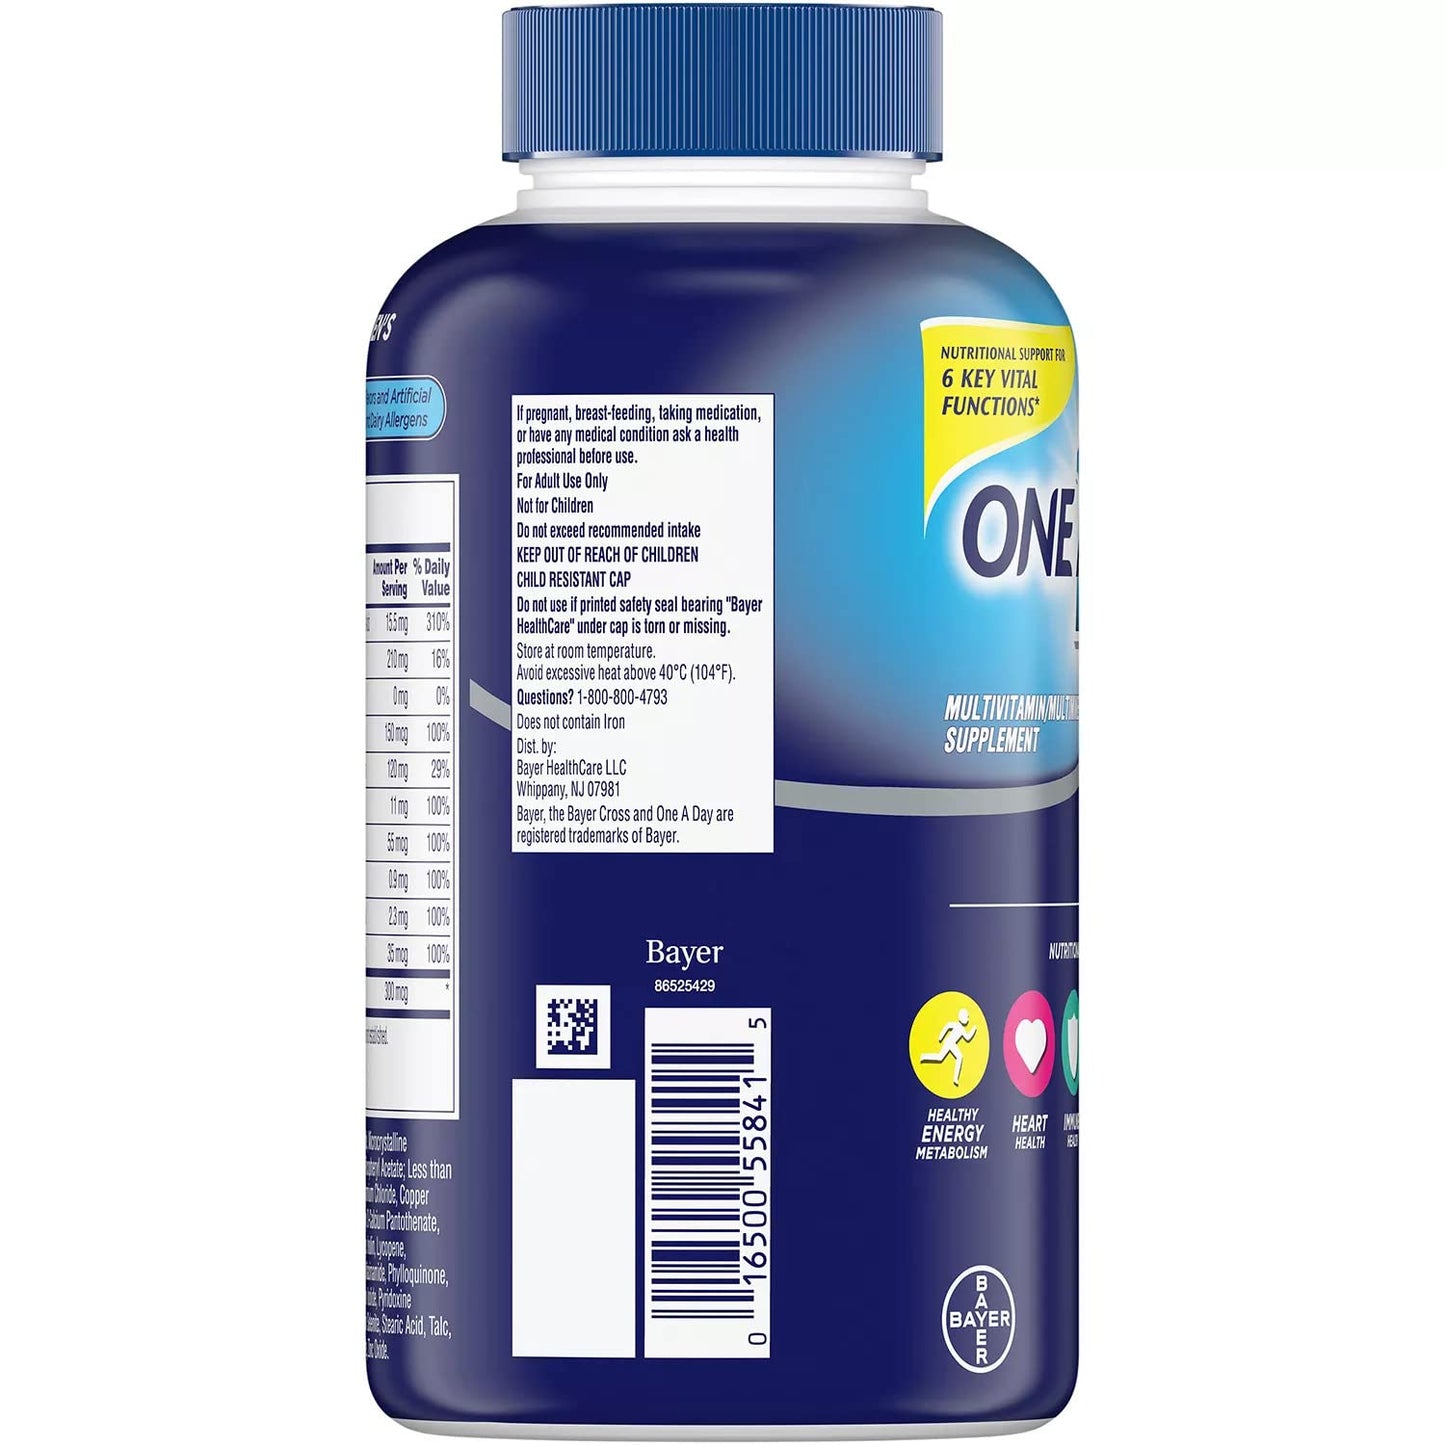 BAYER ONE A DAY MEN’S COMPLETE MULTIVITAMIN, 300 TABLETS